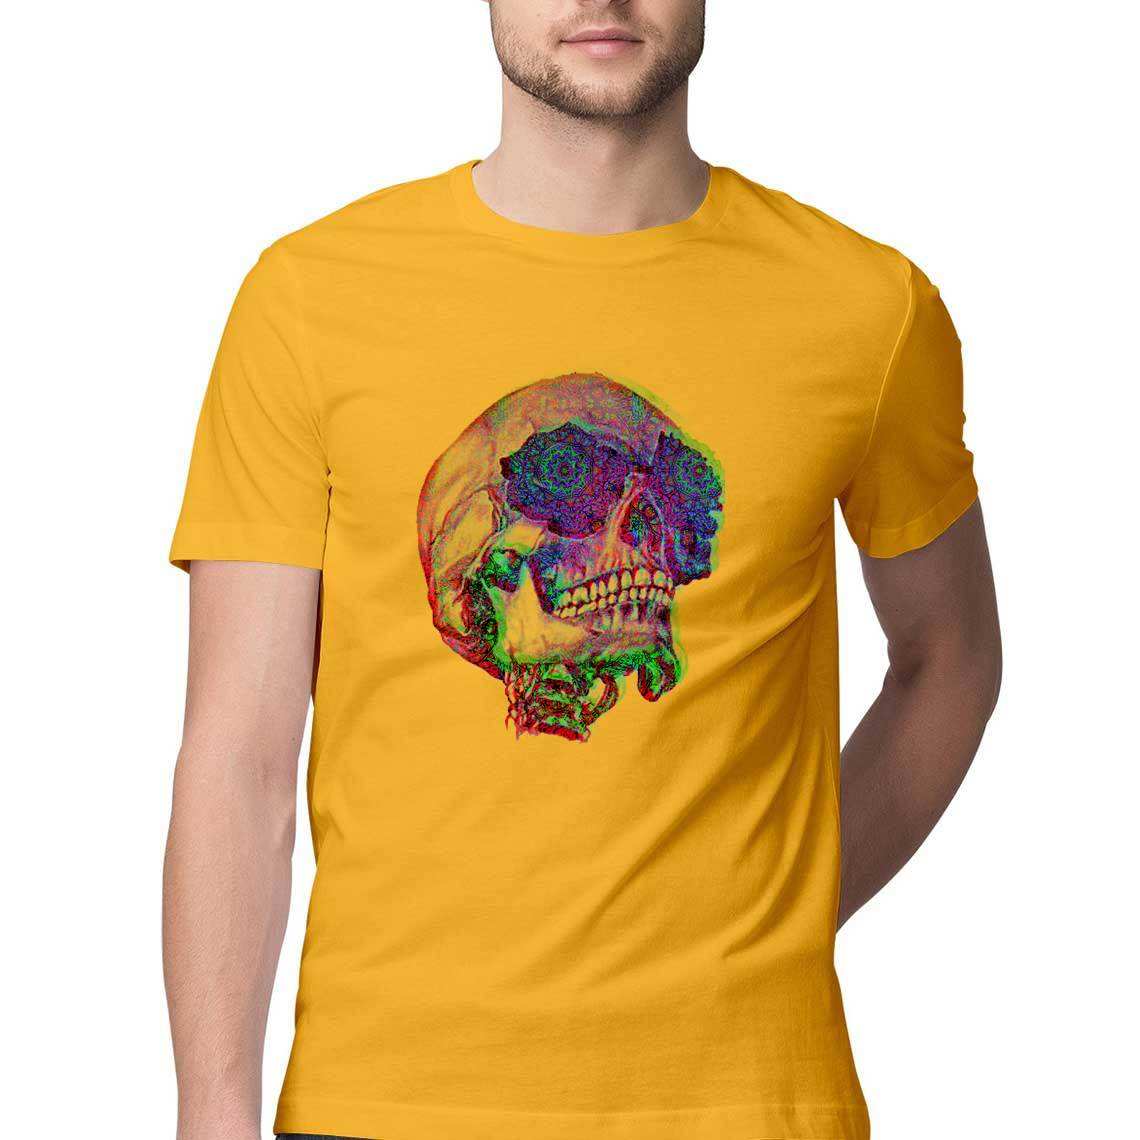 The Man with the Visions of Tomorrow Men's T-Shirt - CBD Store India